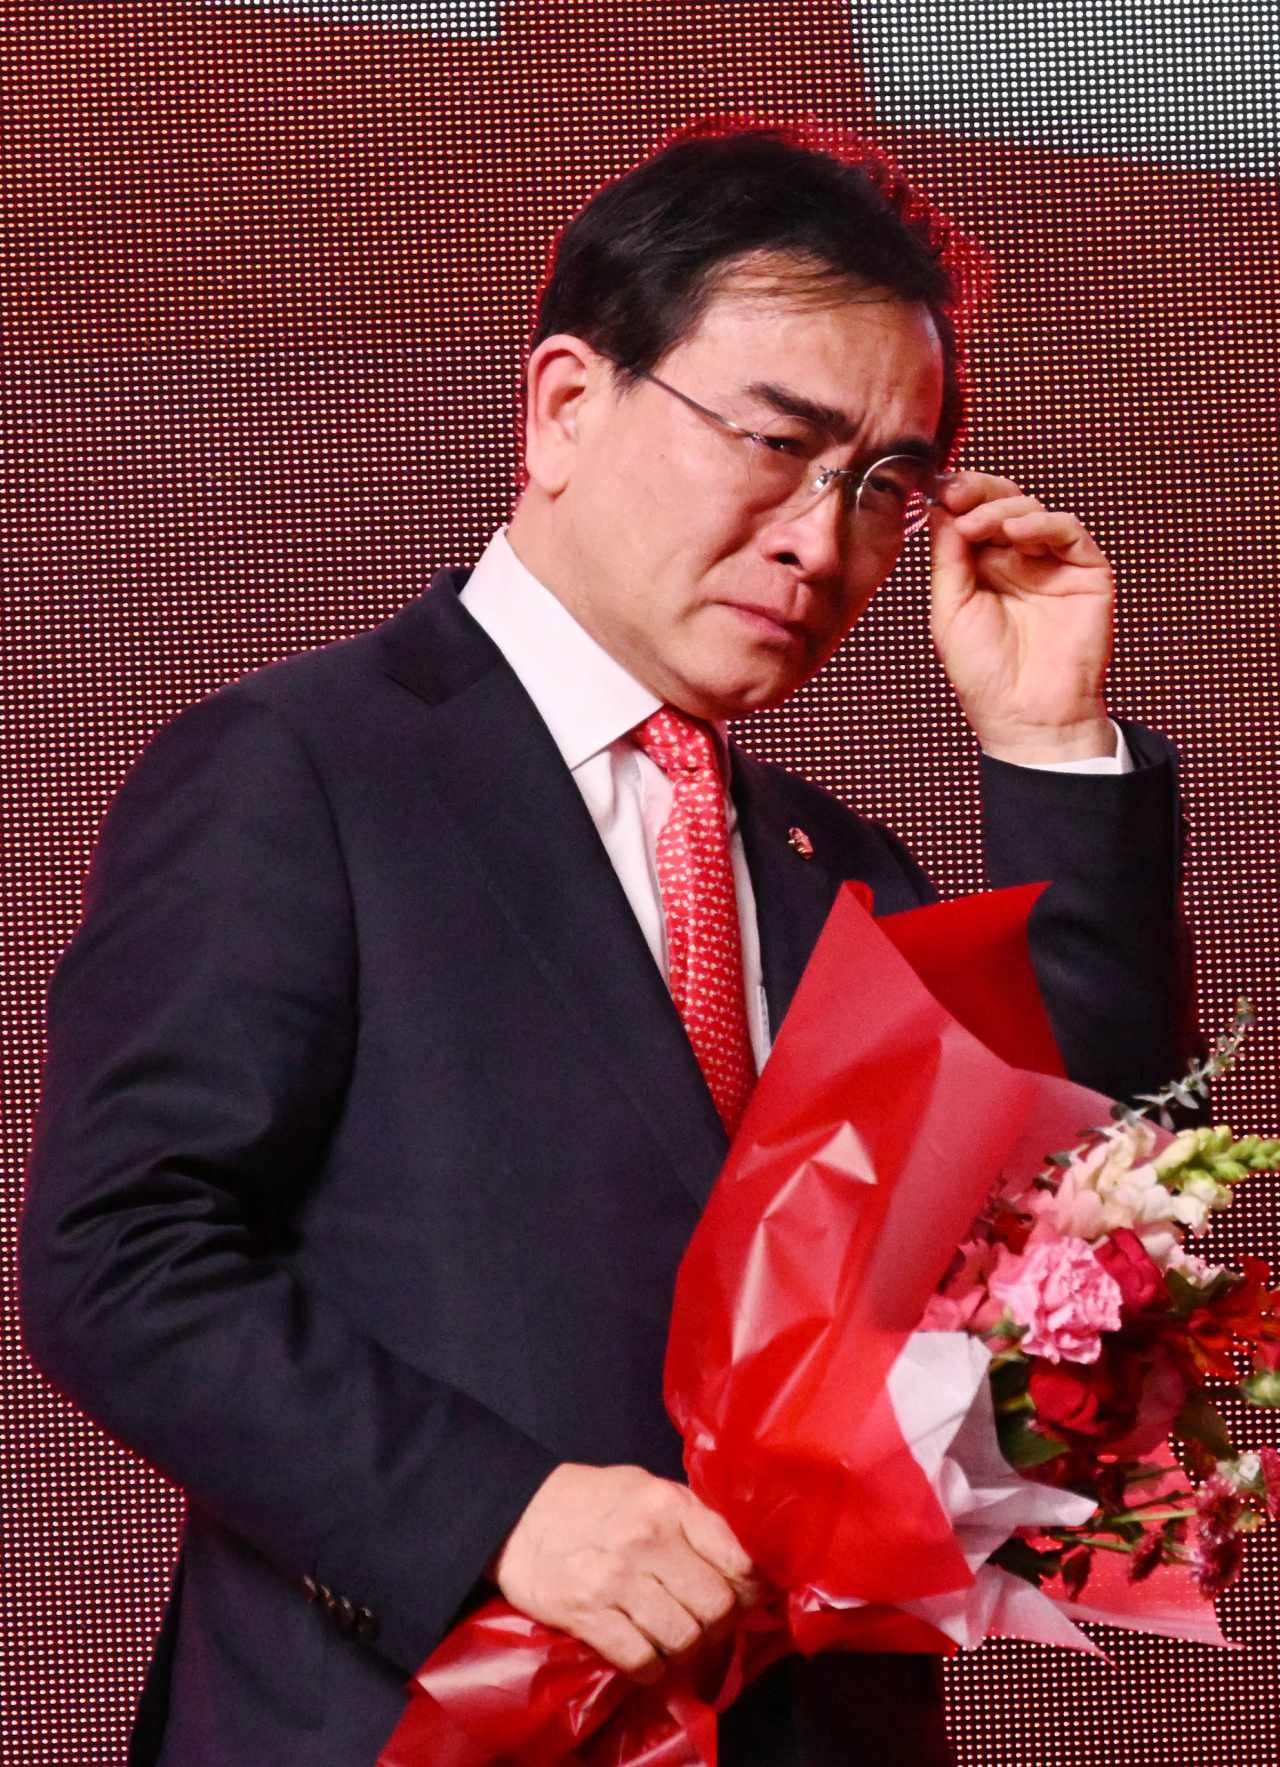 Rep. Tae Yong-ho delivers an emotional speech on Wednesday after winning a seat on the ruling People Power Party’s supreme council. He is the first North Korean defector to assume a leadership position in a South Korean political party. (Yonhap)